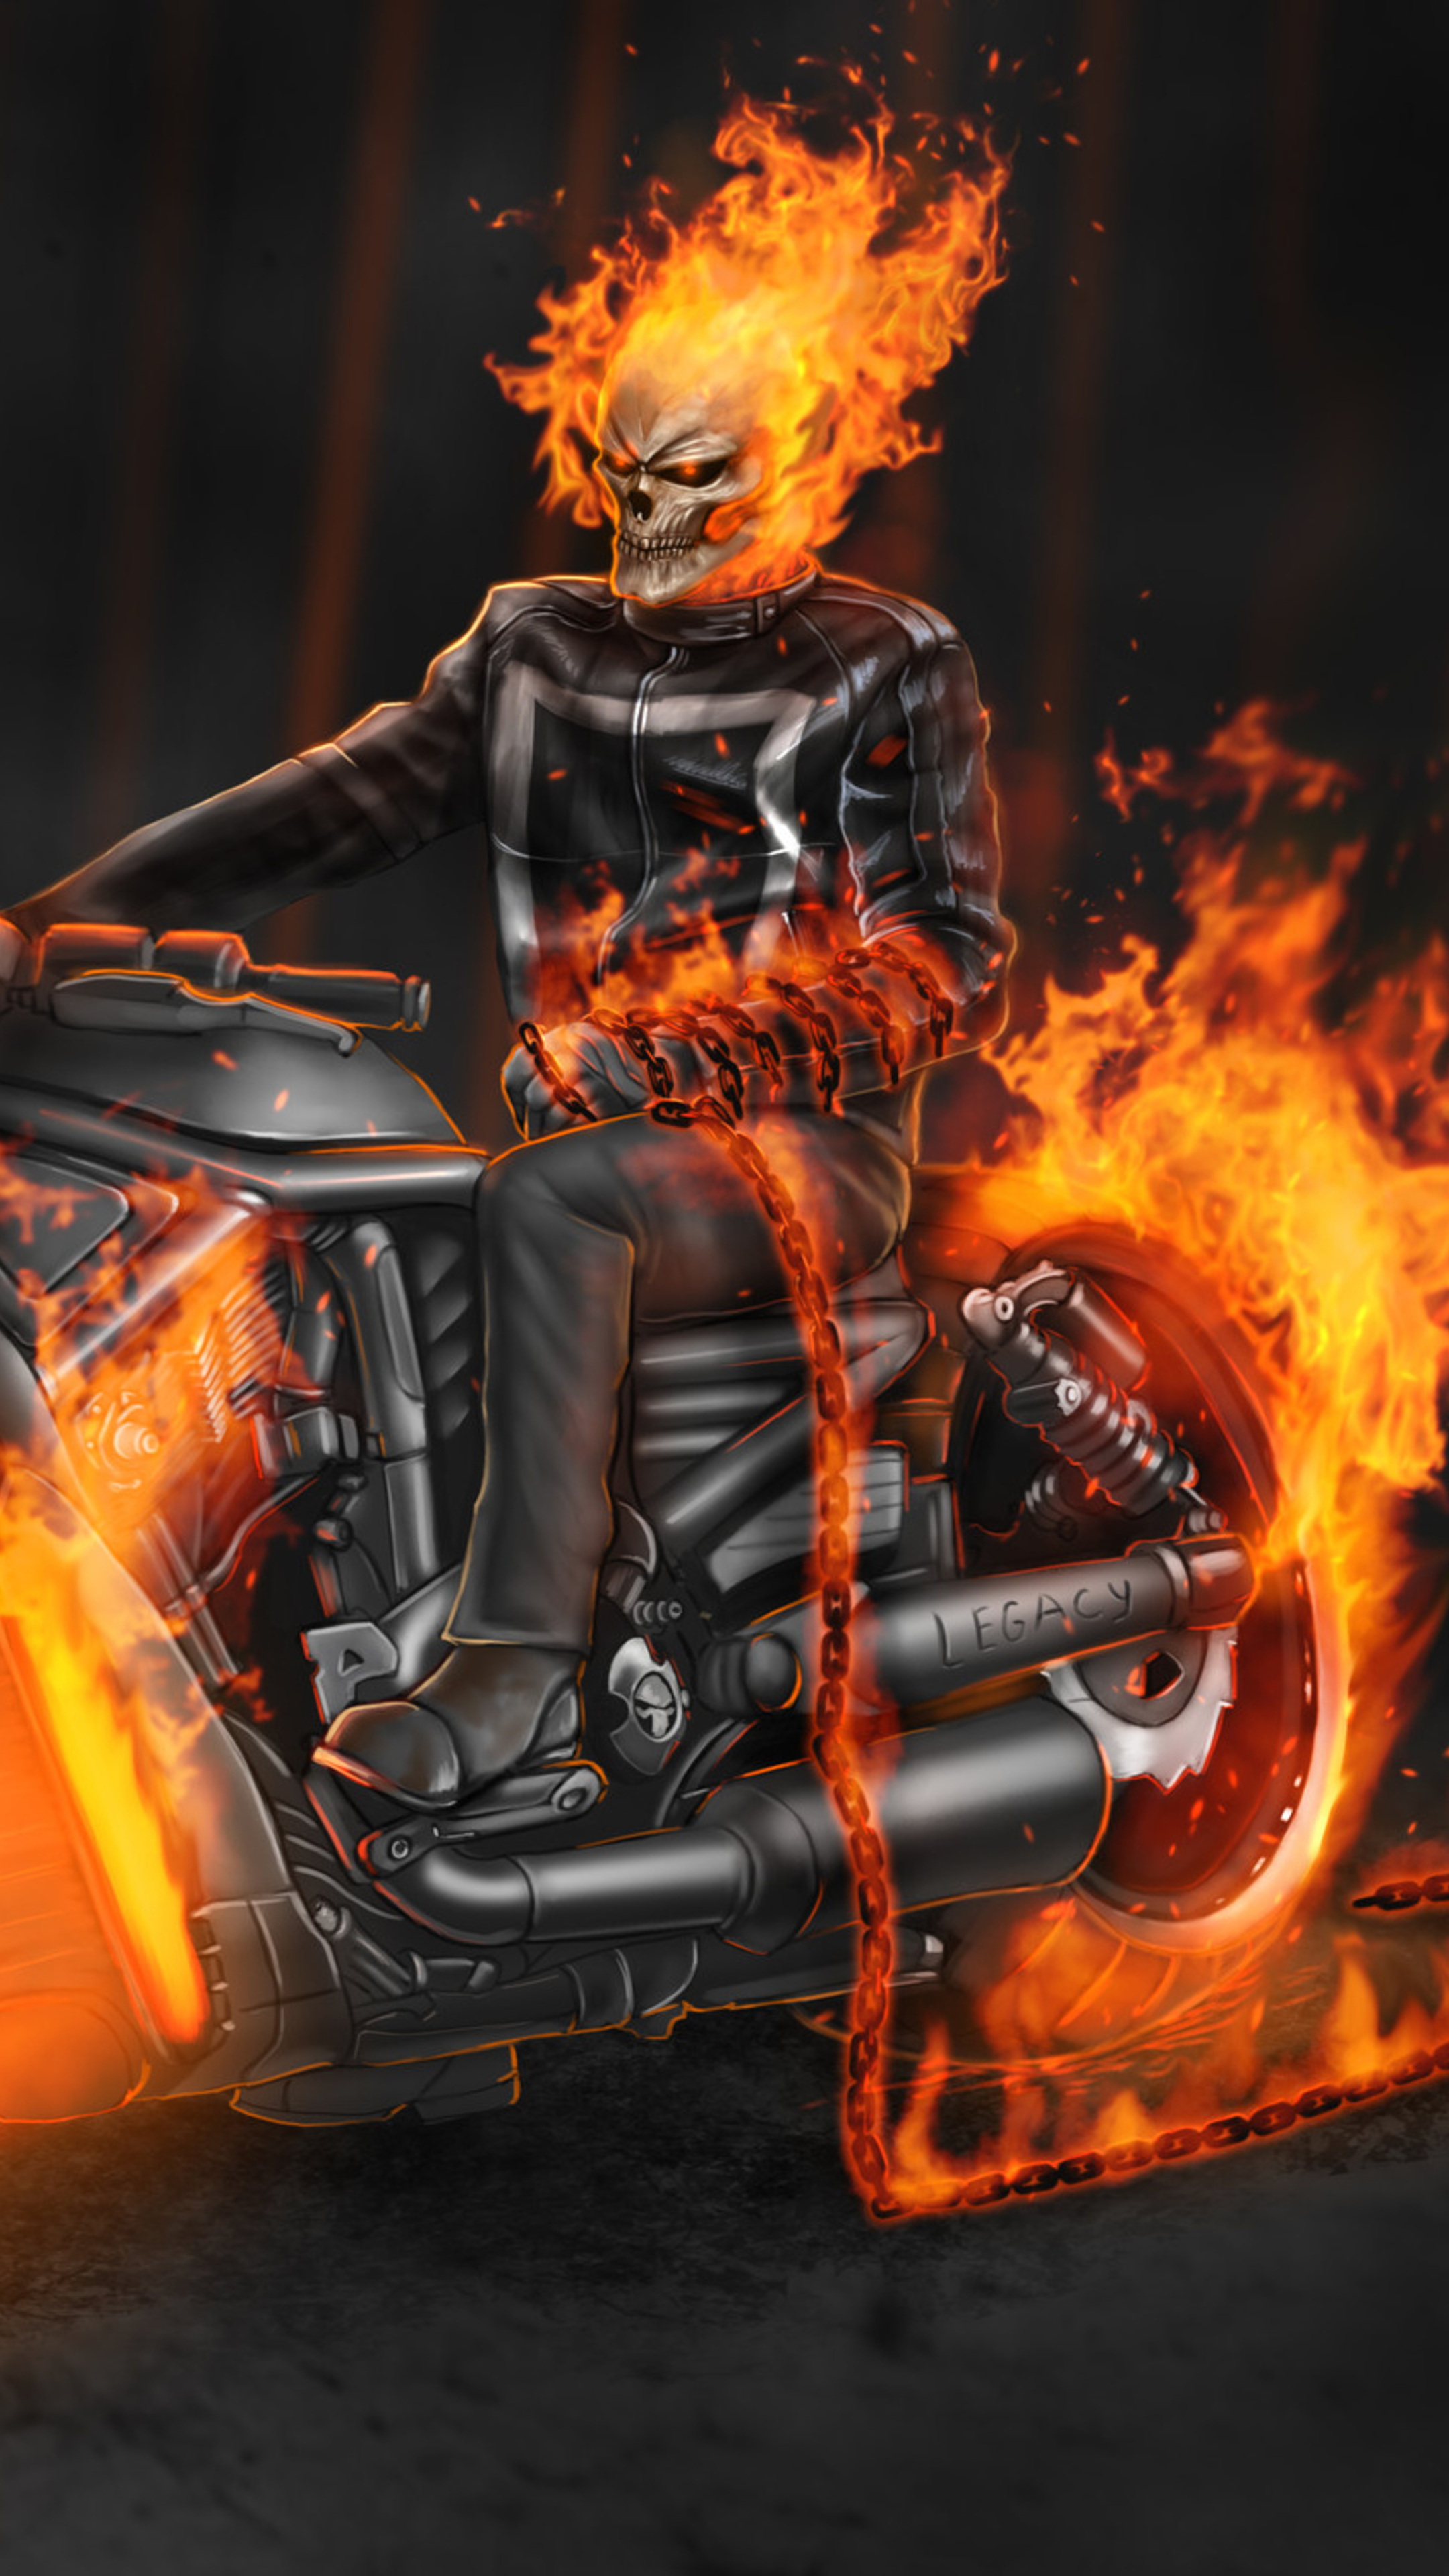 images of ghost rider bike